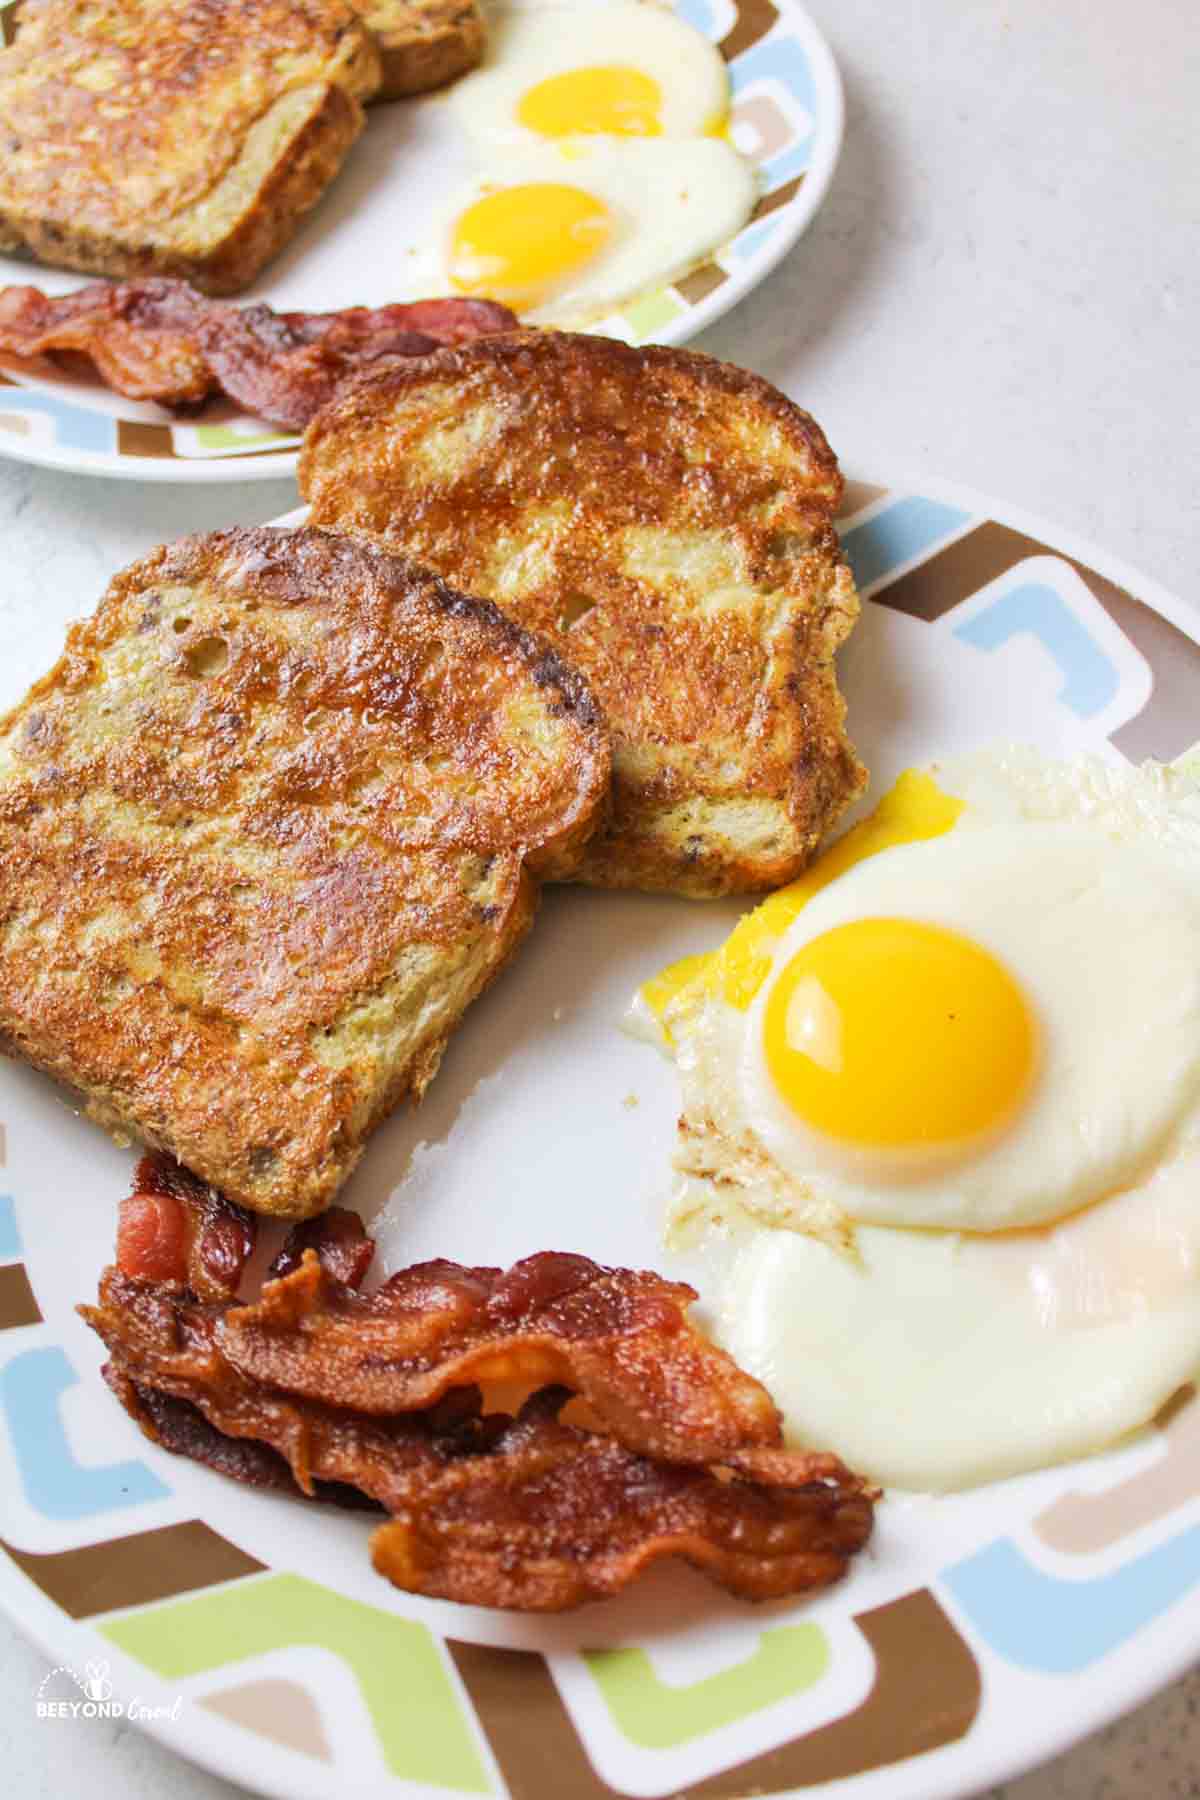 eggs, bacon, and french toast on plates.